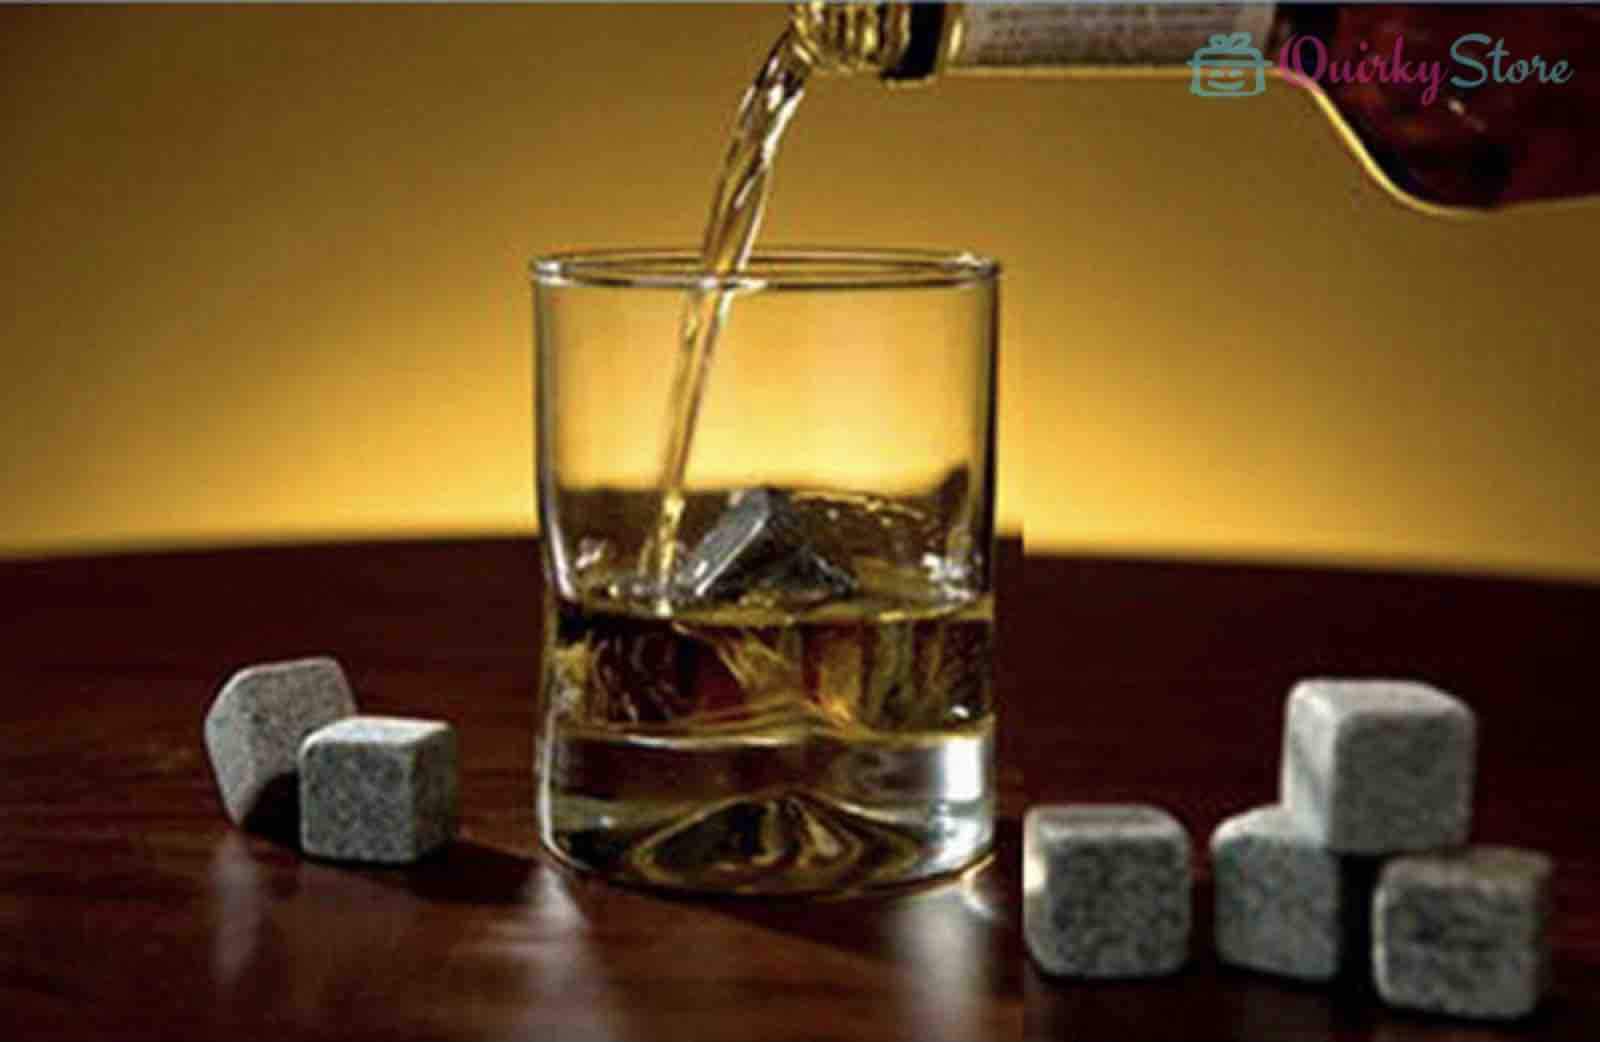 Whisky Stone ( 9 Pcs Whisky Stone ) - QuirkyStore.in